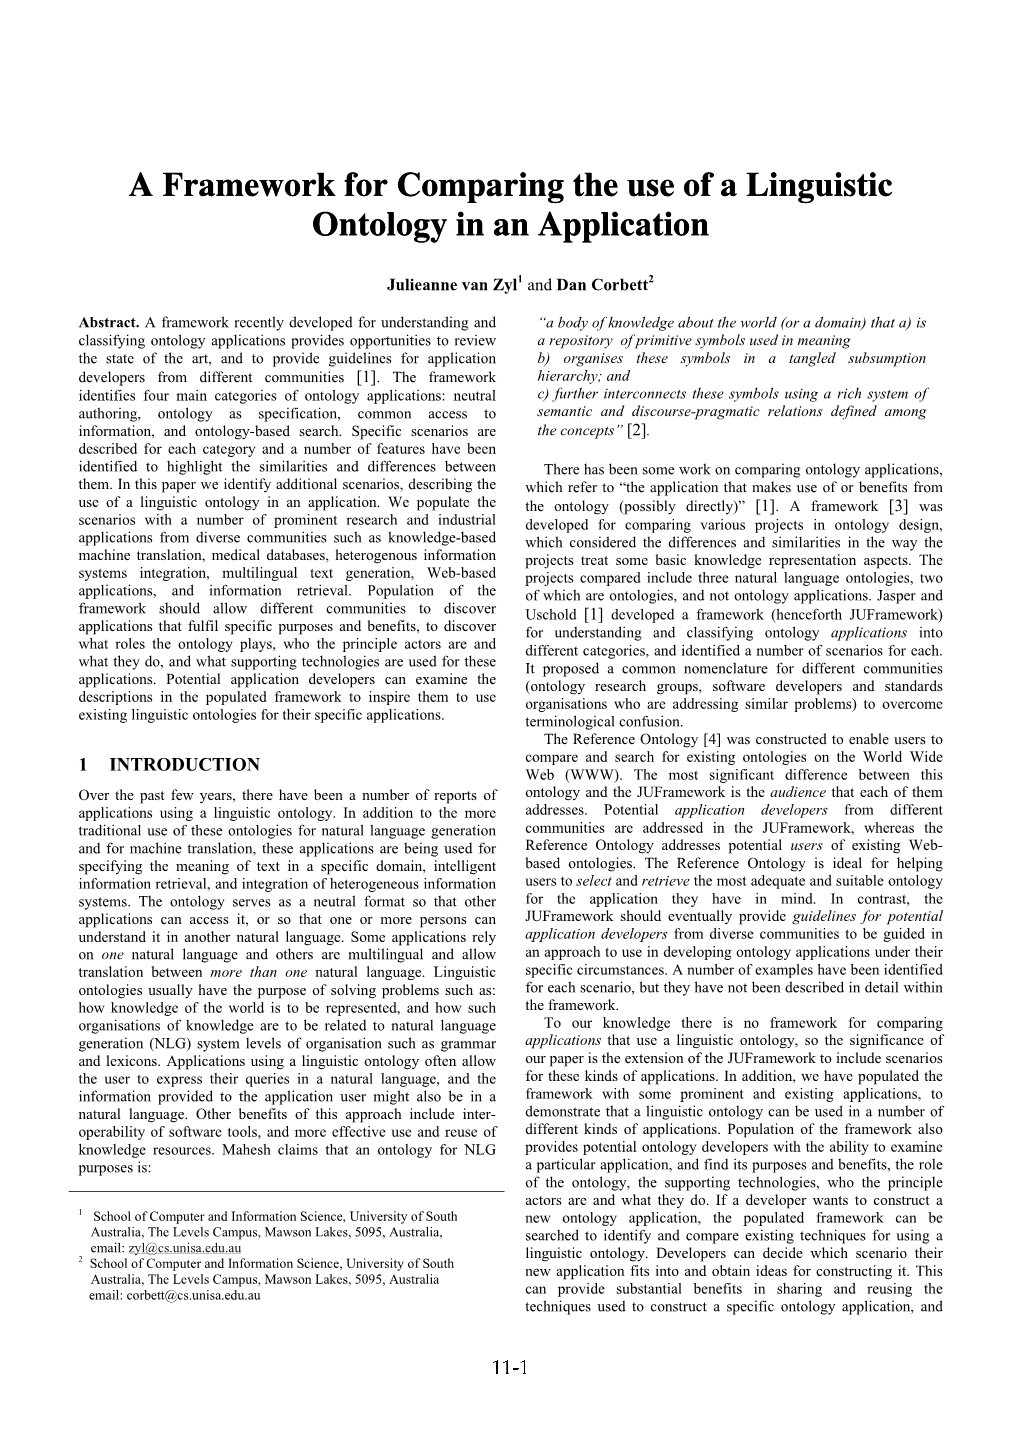 A Framework for Comparing the Use of a Linguistic Ontology in an Application